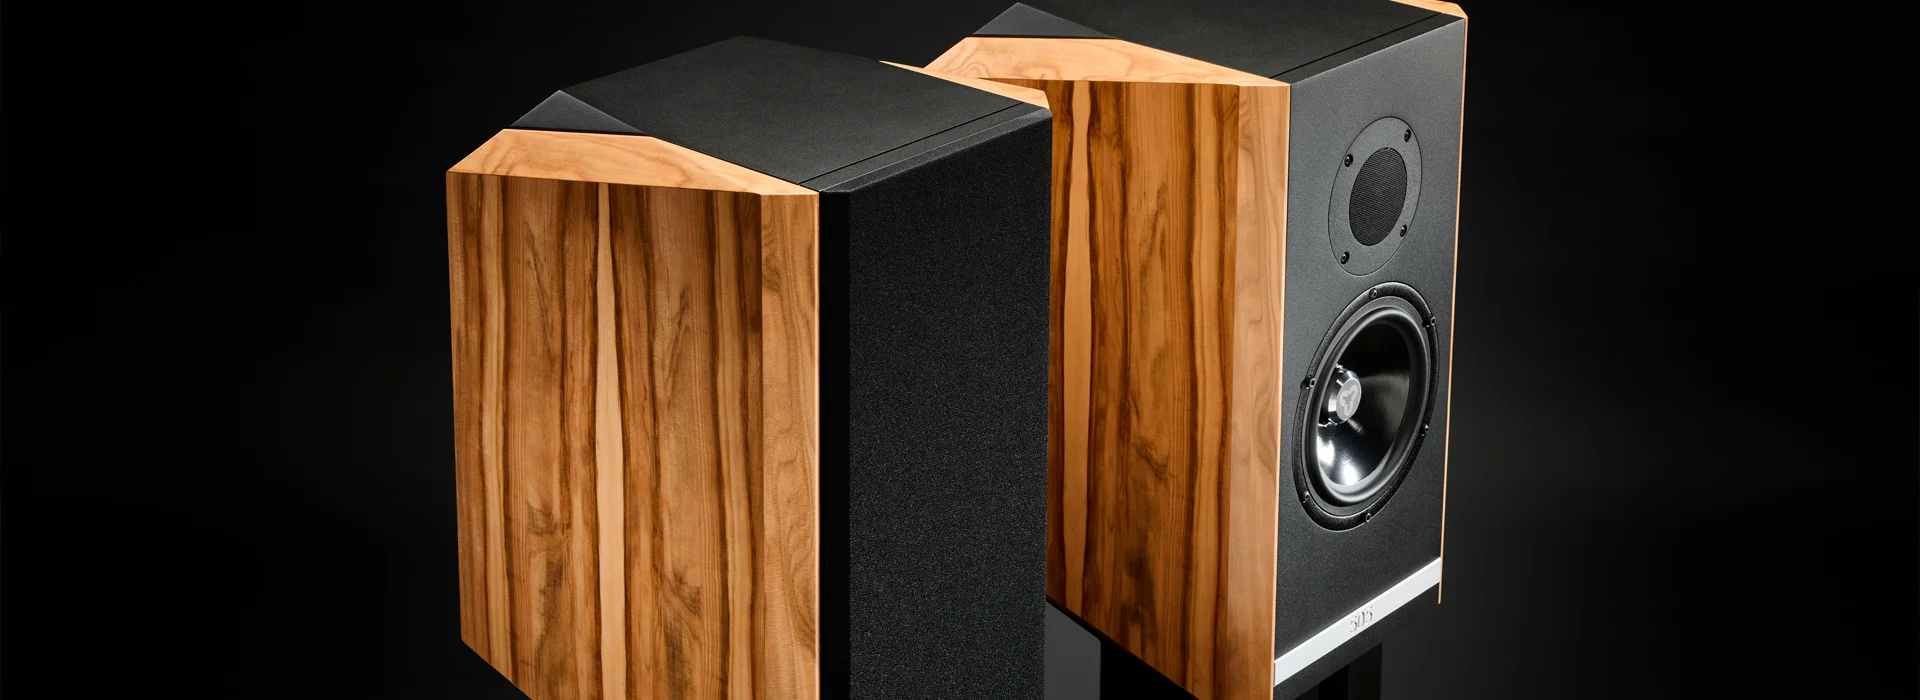 Kudos Speakers on demo at The Audiobarn